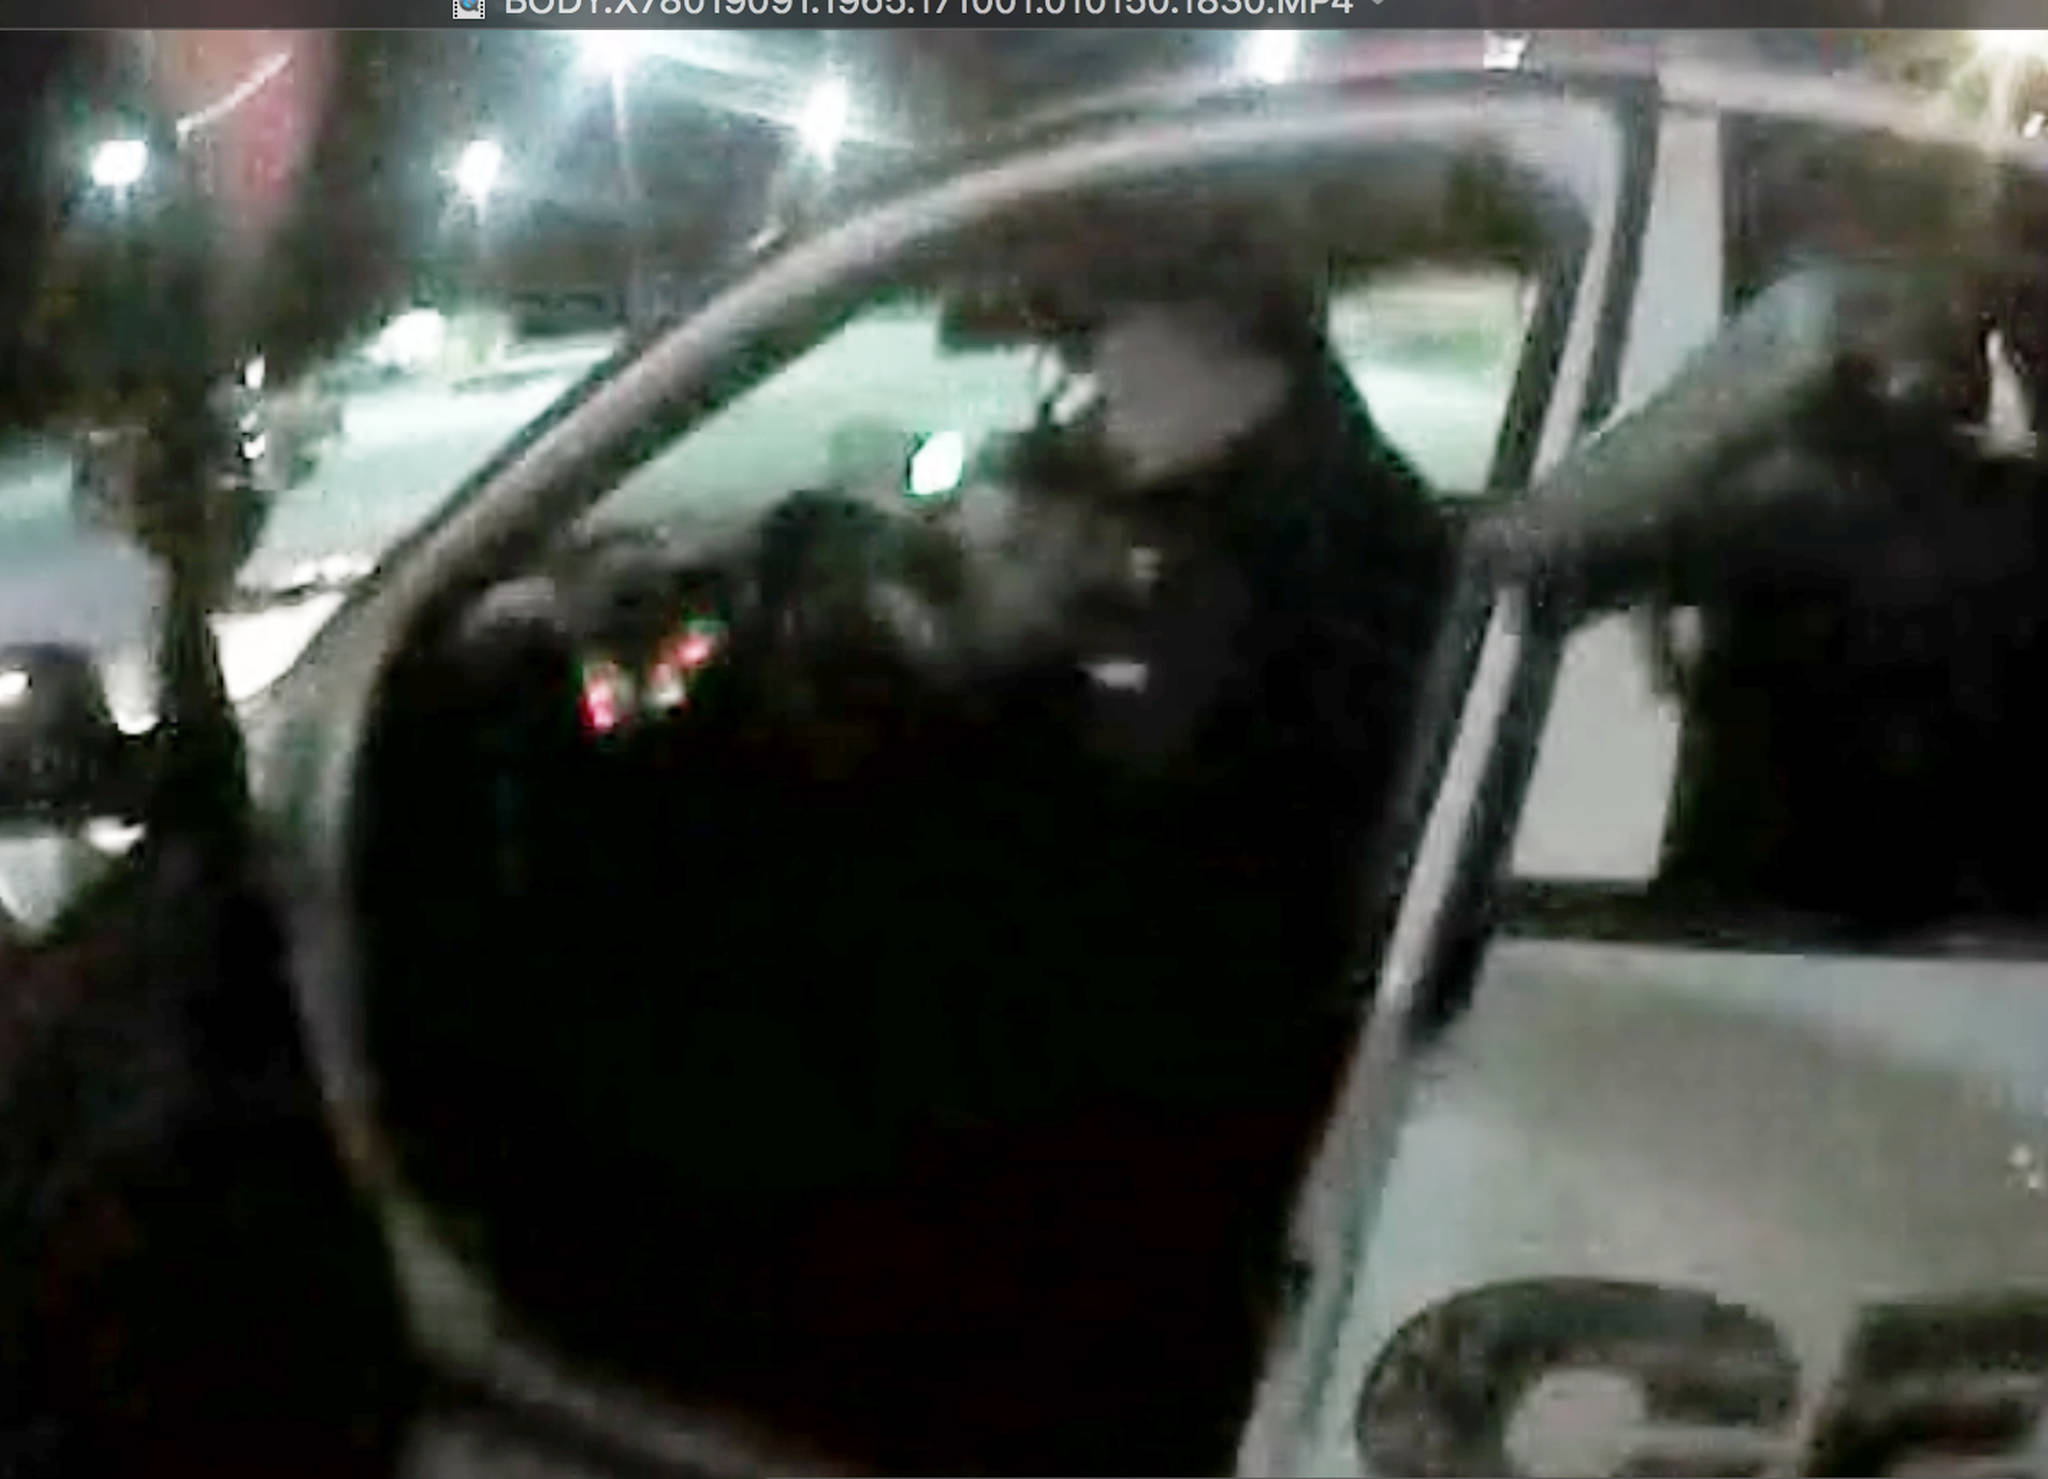 This Oct. 1, 2017 still image taken from police body camera video, provided by the city of Seward, Alaska, in response to a public records request, shows Seward Police Officer Michael “Eddie” Armstrong ordering Micah McComas out of the front seat of his patrol car, after placing him handcuffed in the back seat, during a traffic stop in Seward. Armstrong has been cleared in last year’s fatal shooting of McComas, who had been placed in the backseat of the officer’s idling patrol car and managed to start driving it away. The state attorney general’s office says in a letter to Seward police that it was reasonable for Armstrong to use deadly force. (City of Seward)